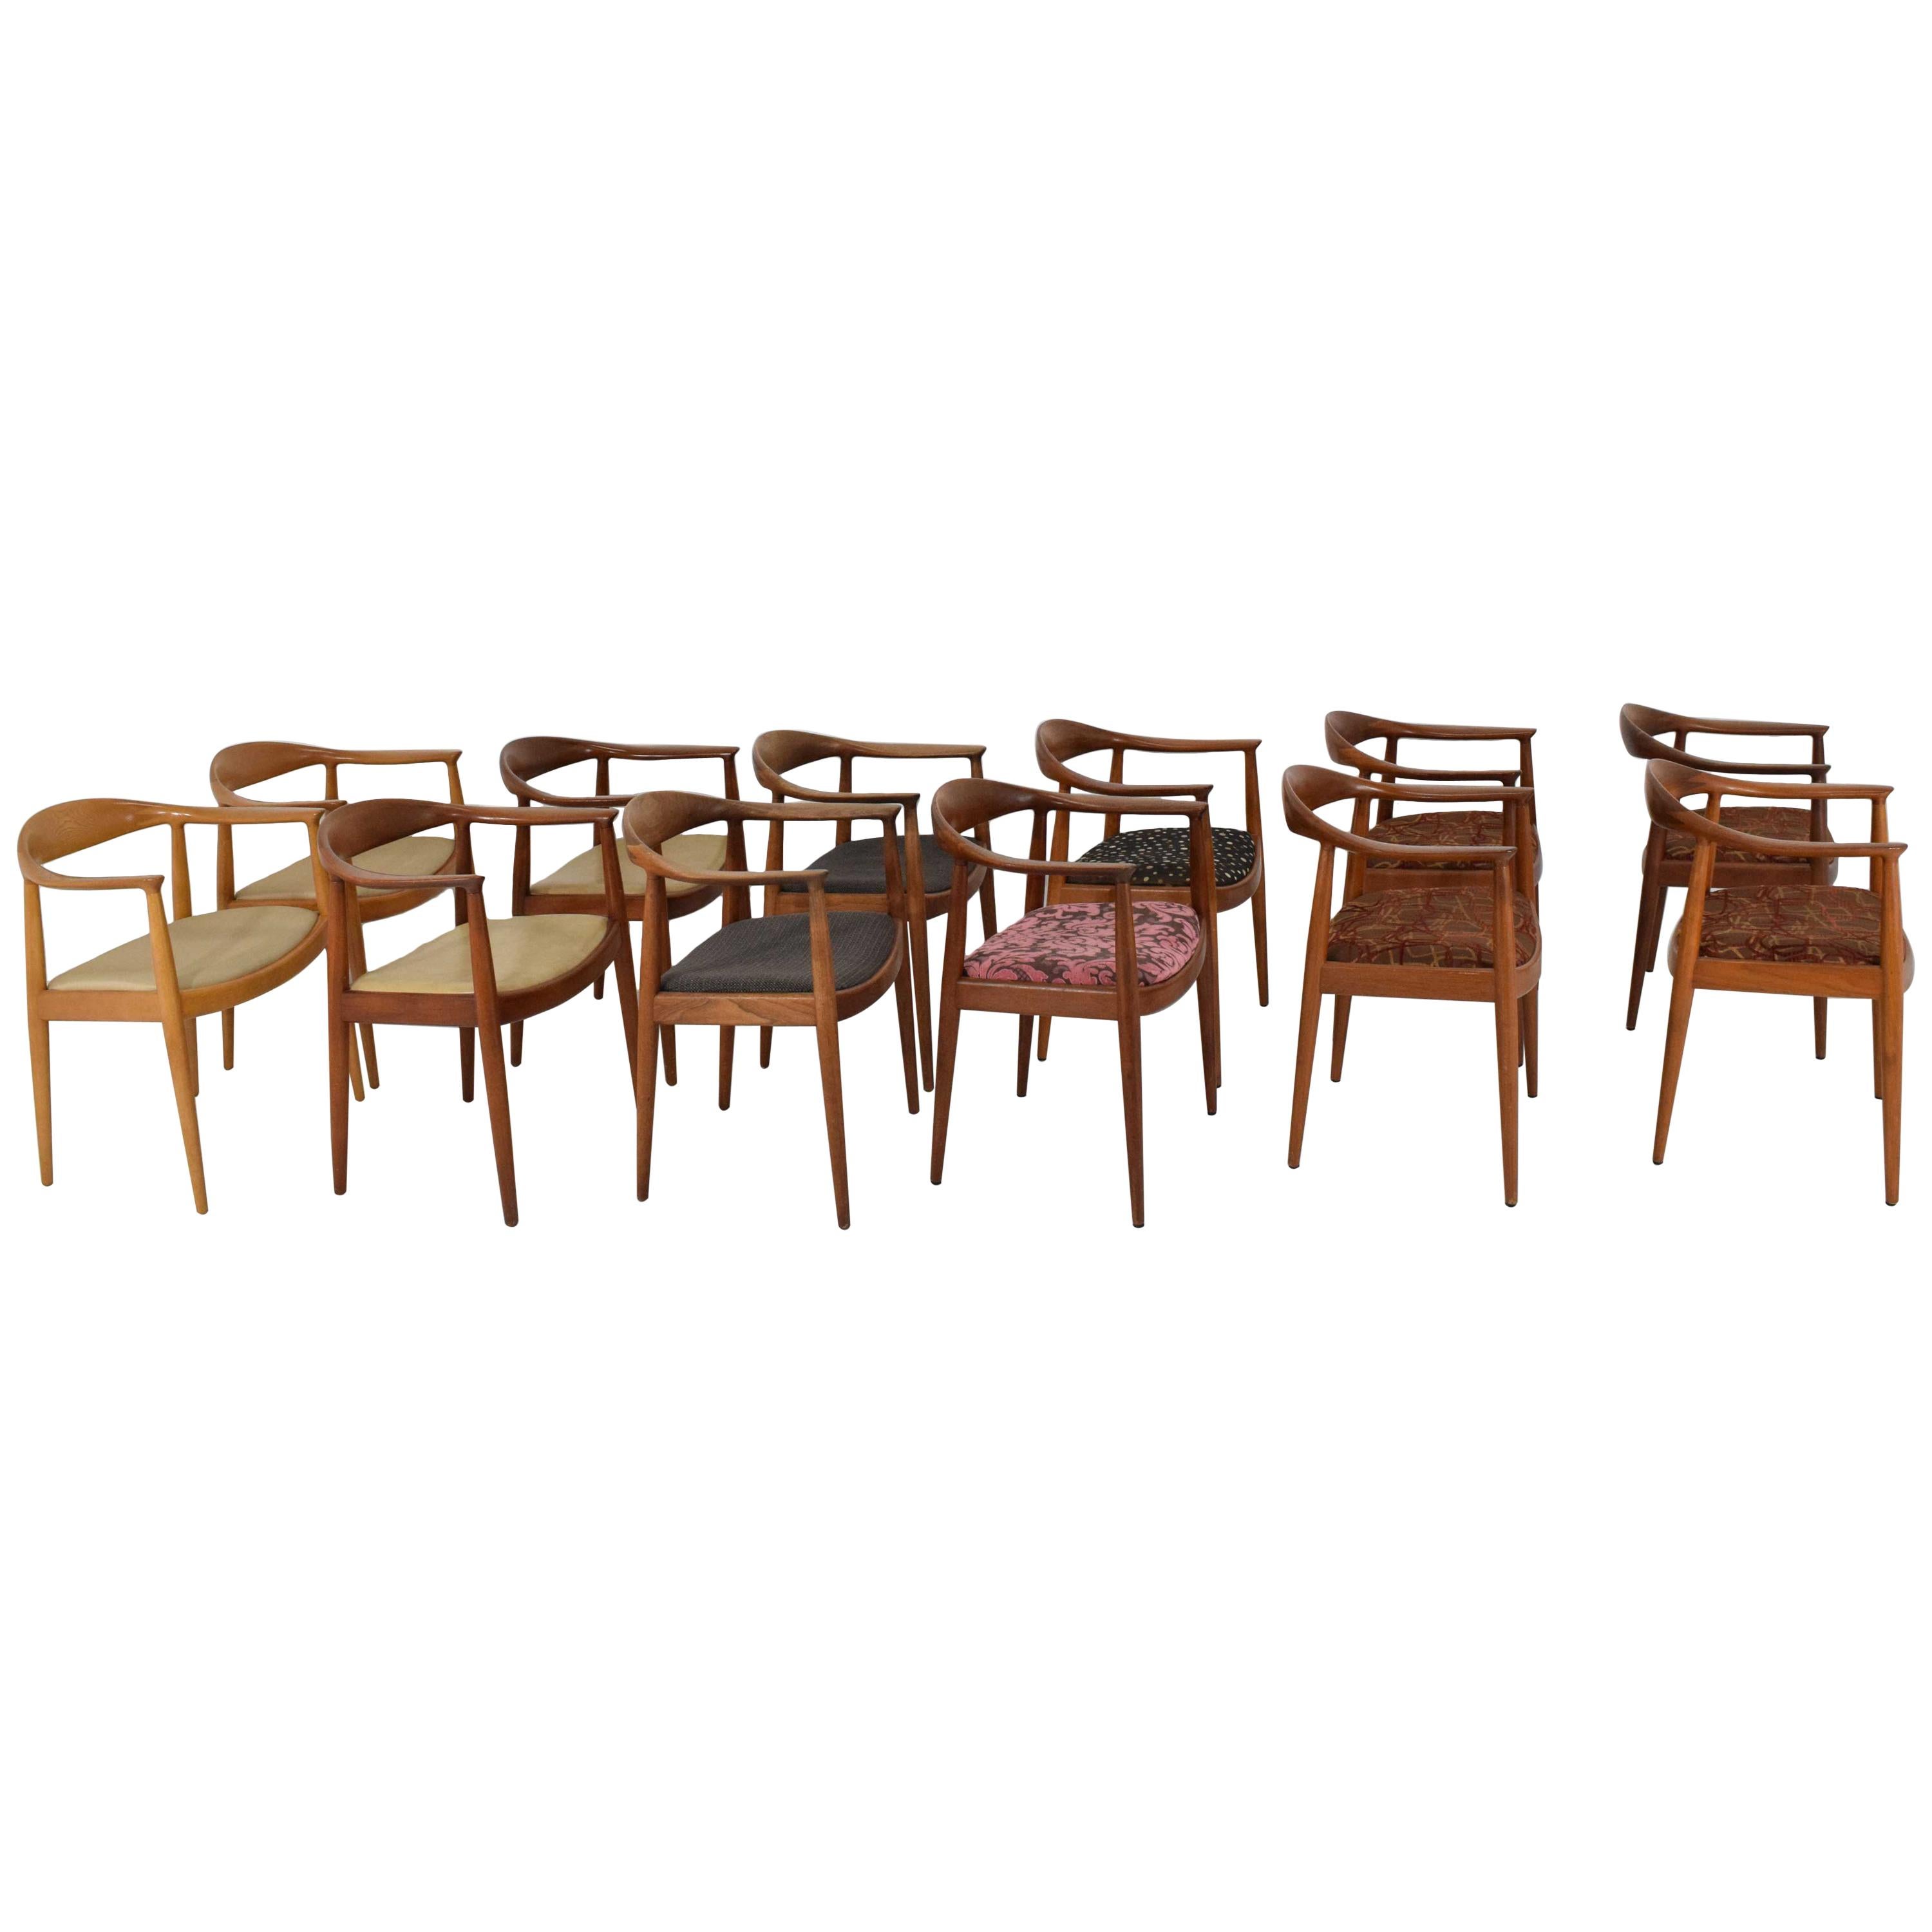 Hans Wegner Round Chairs 8 Available